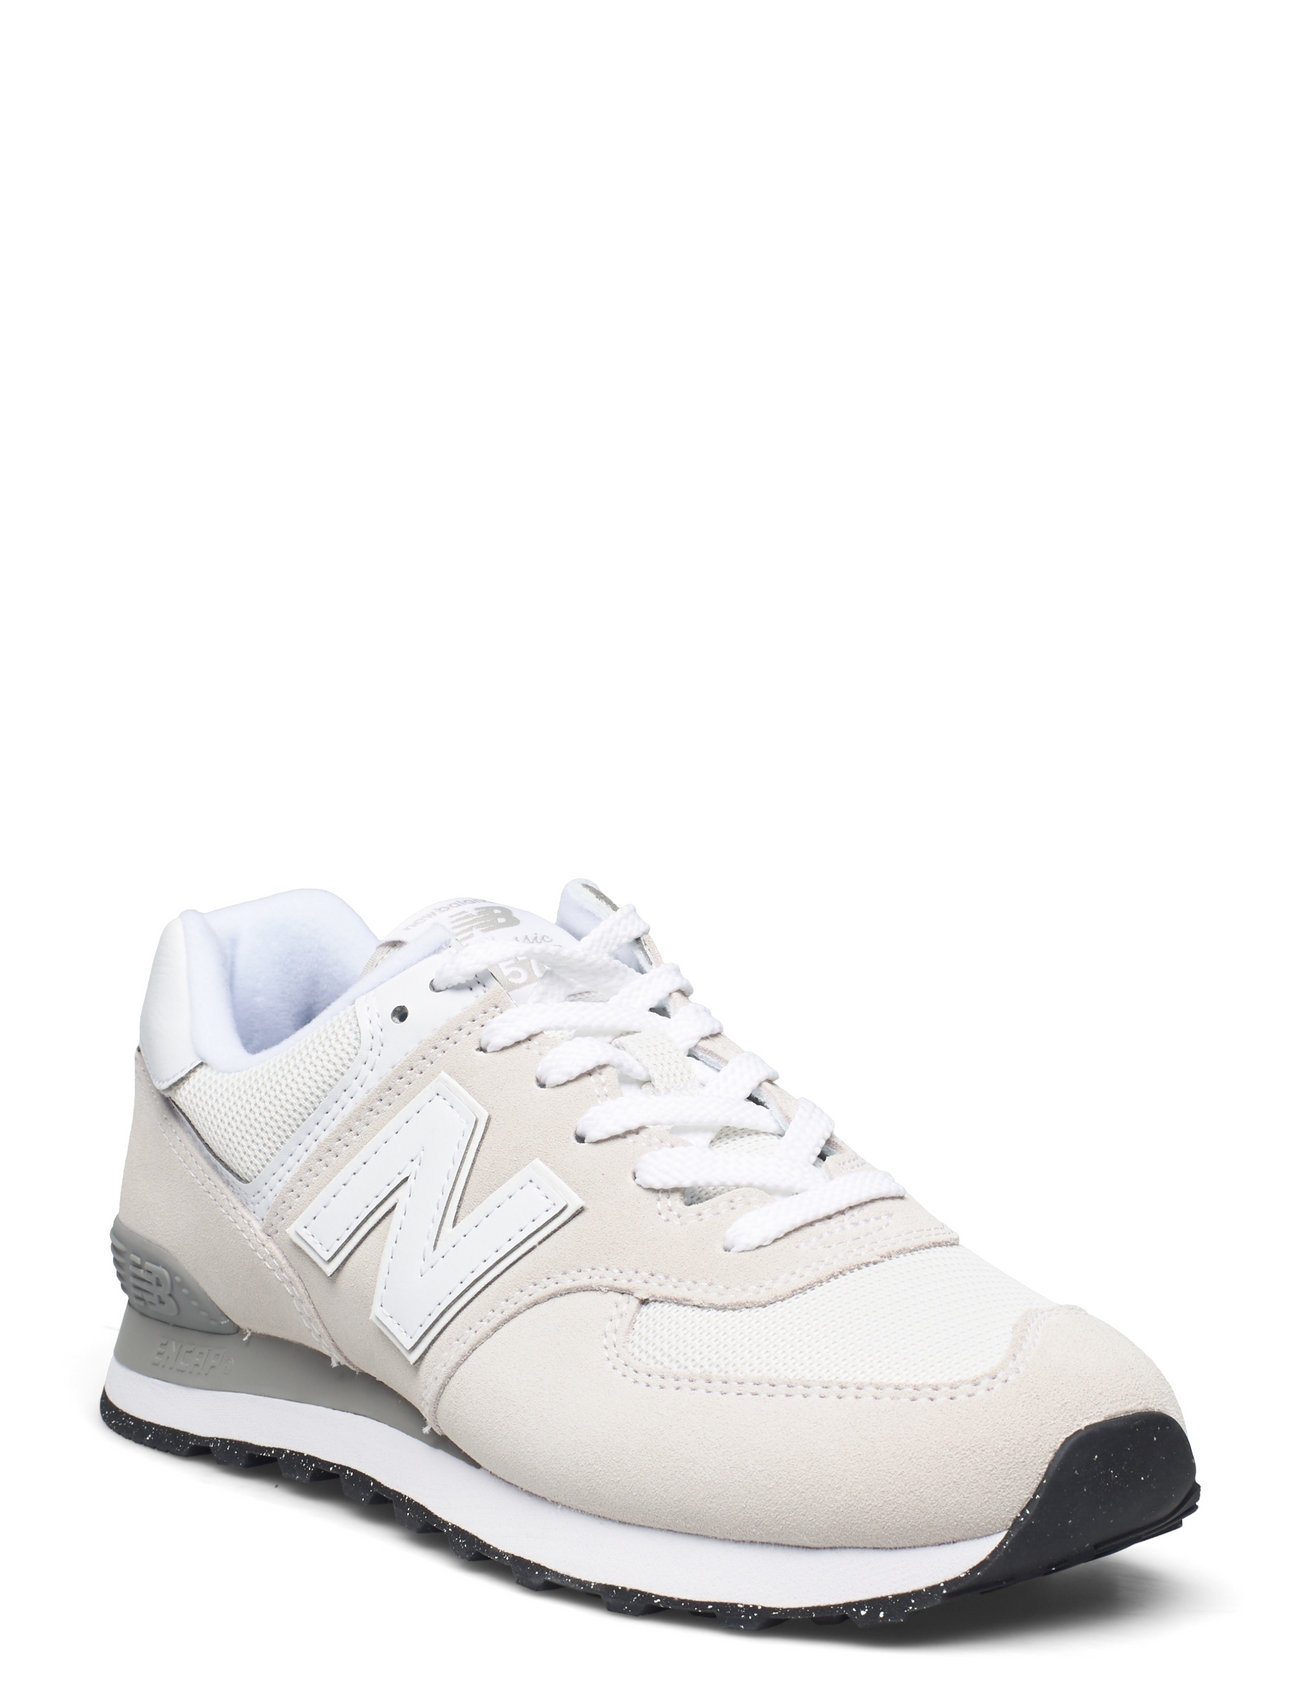 New Balance 574 Sport Sneakers Low-top Sneakers Cream New Balance